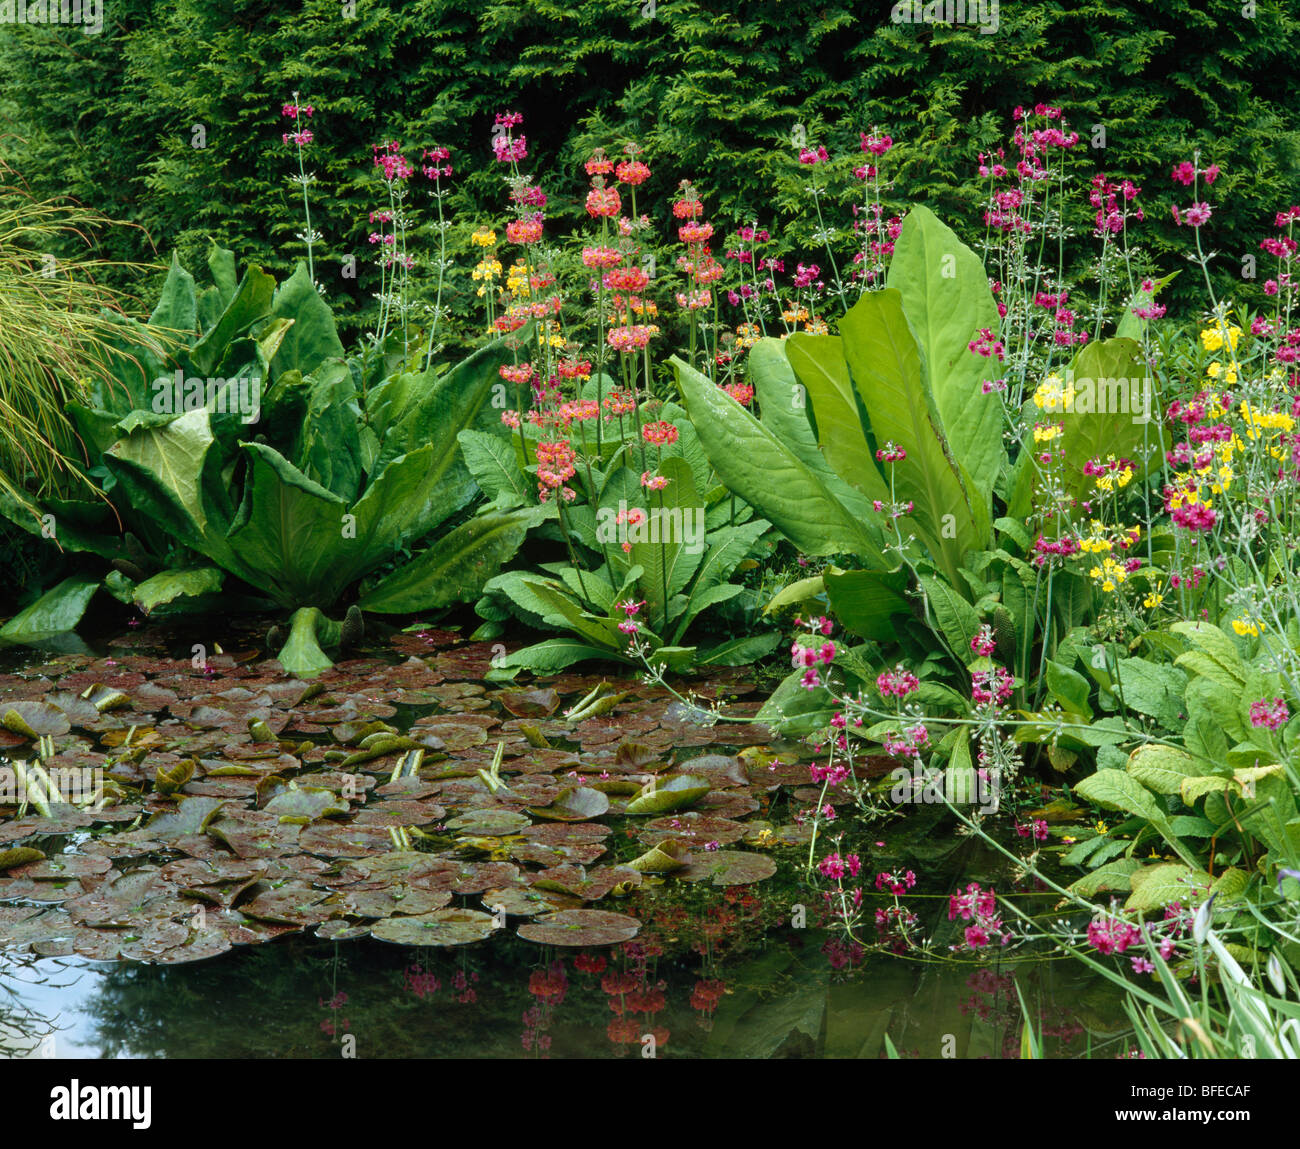 Pink and red candelabra primulas at the edge of a pond with water-lilies in leaf Stock Photo